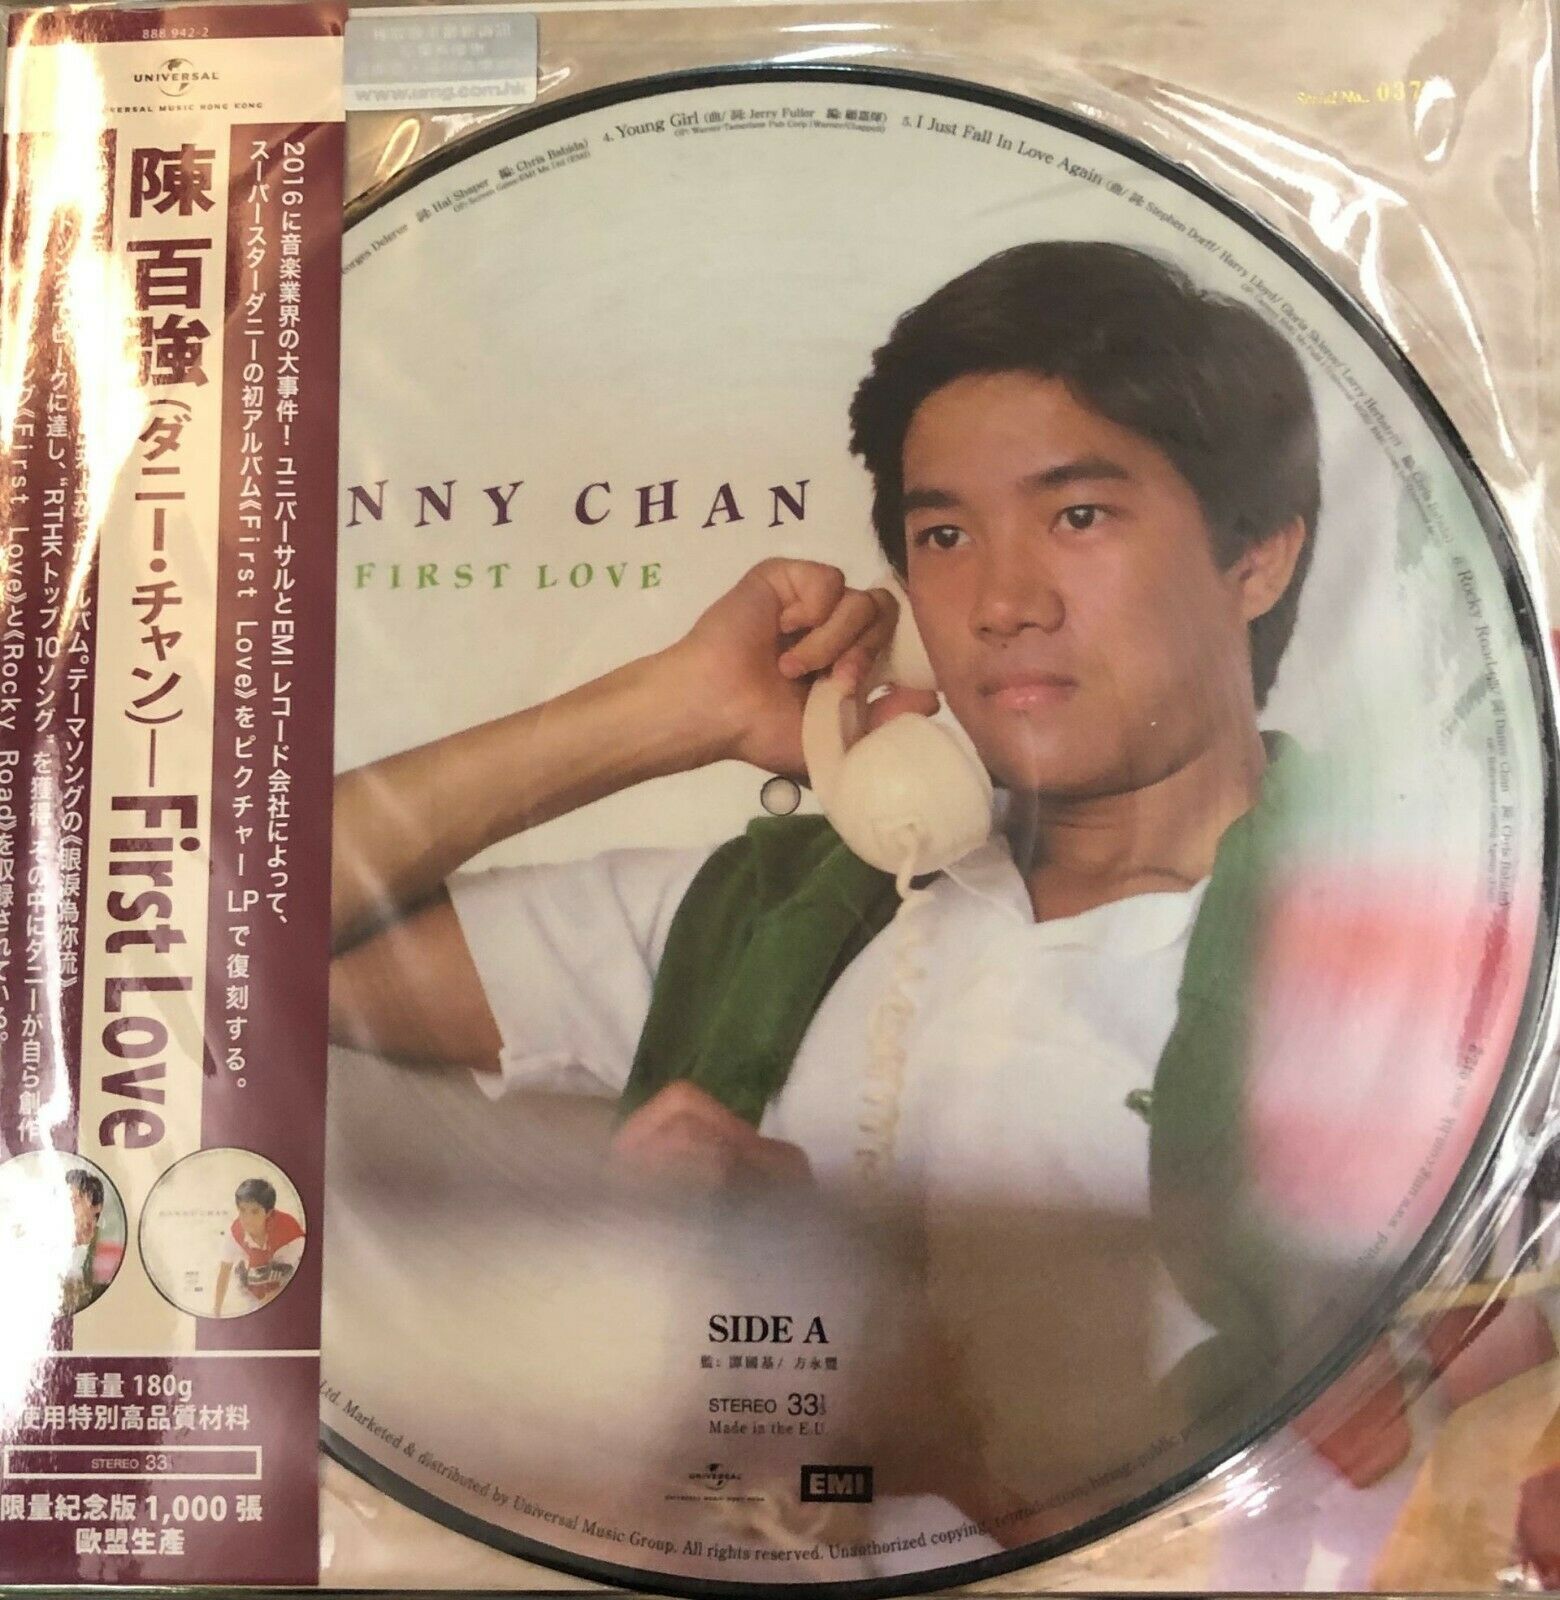 DANNY CHAN - 陳百強 FIRST LOVE (PICTURE VINYL) MADE IN EU